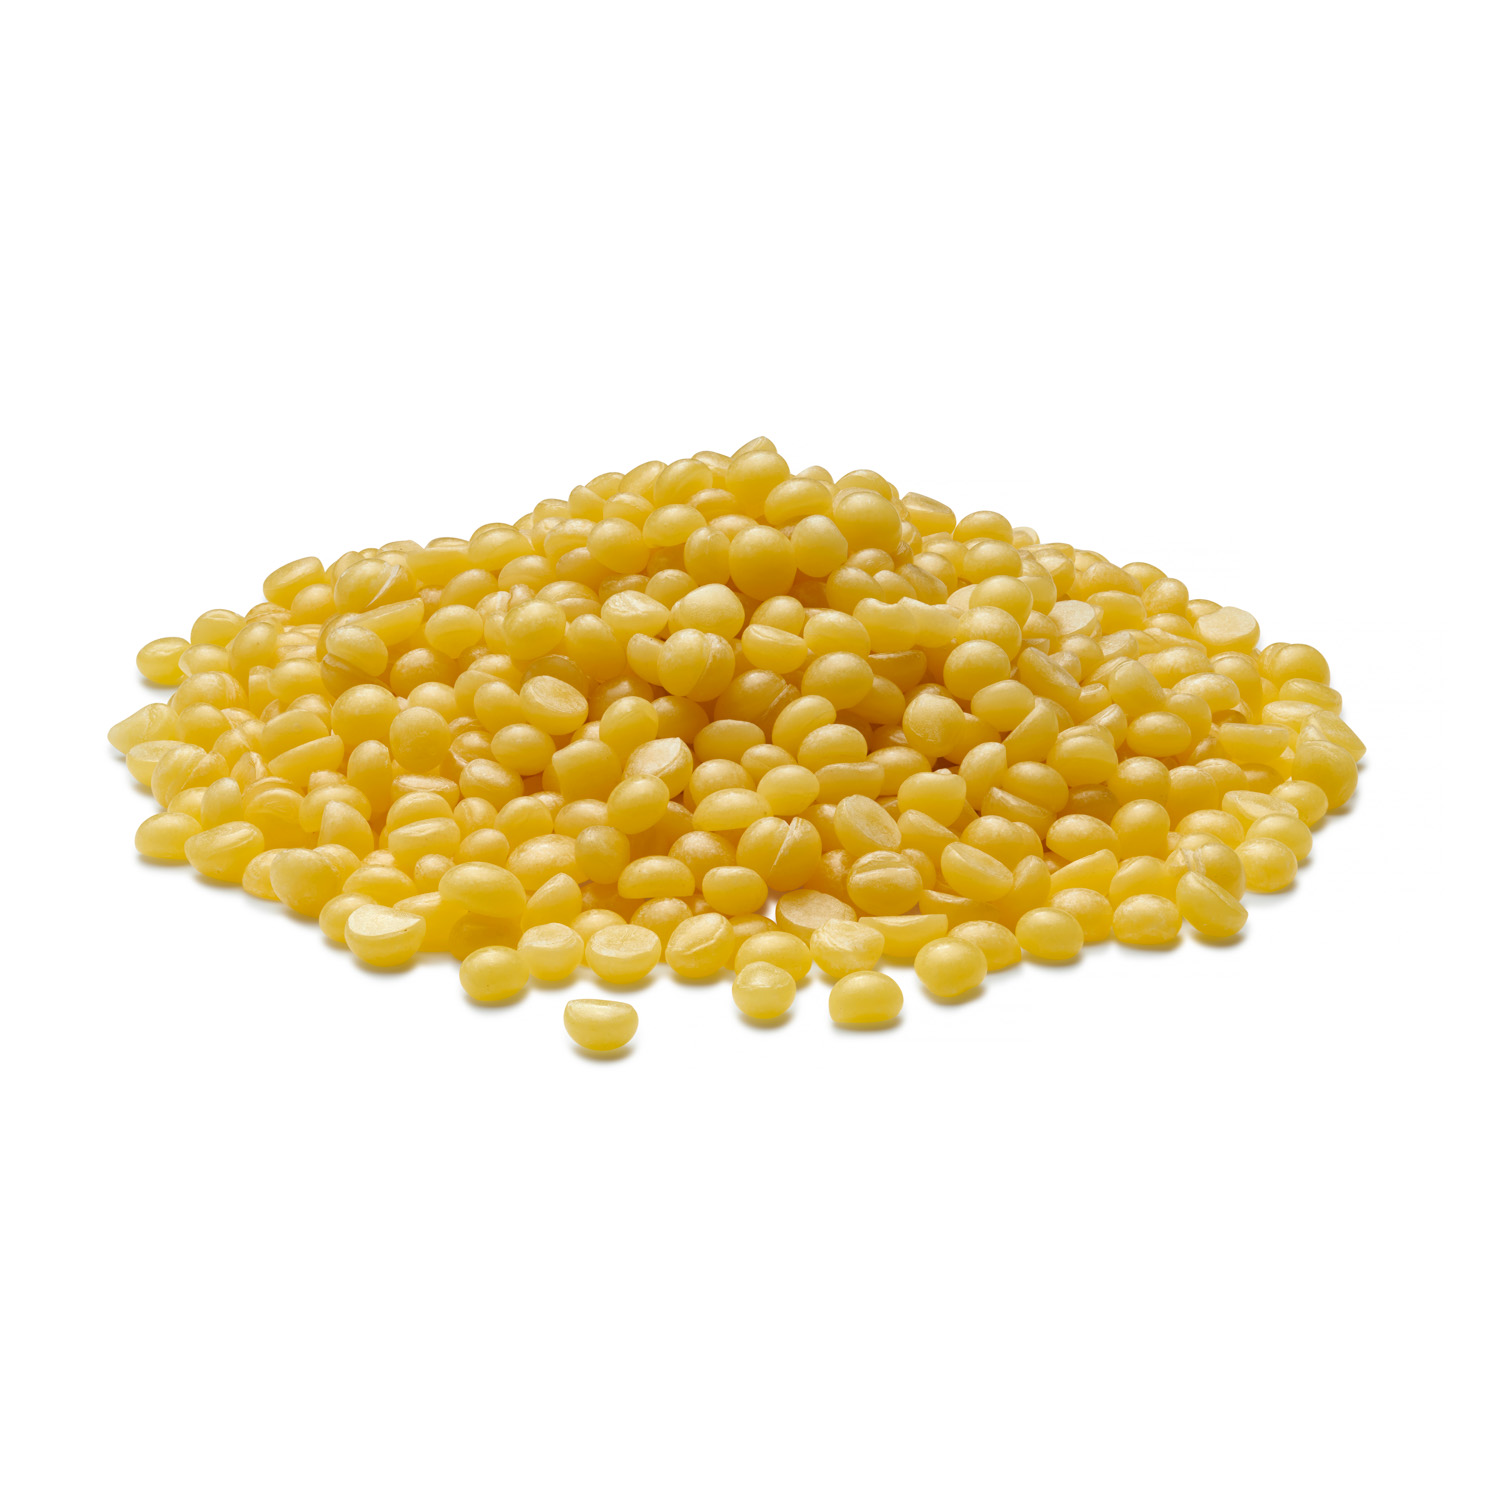 Pellets of Technical Grade Yellow Beeswax